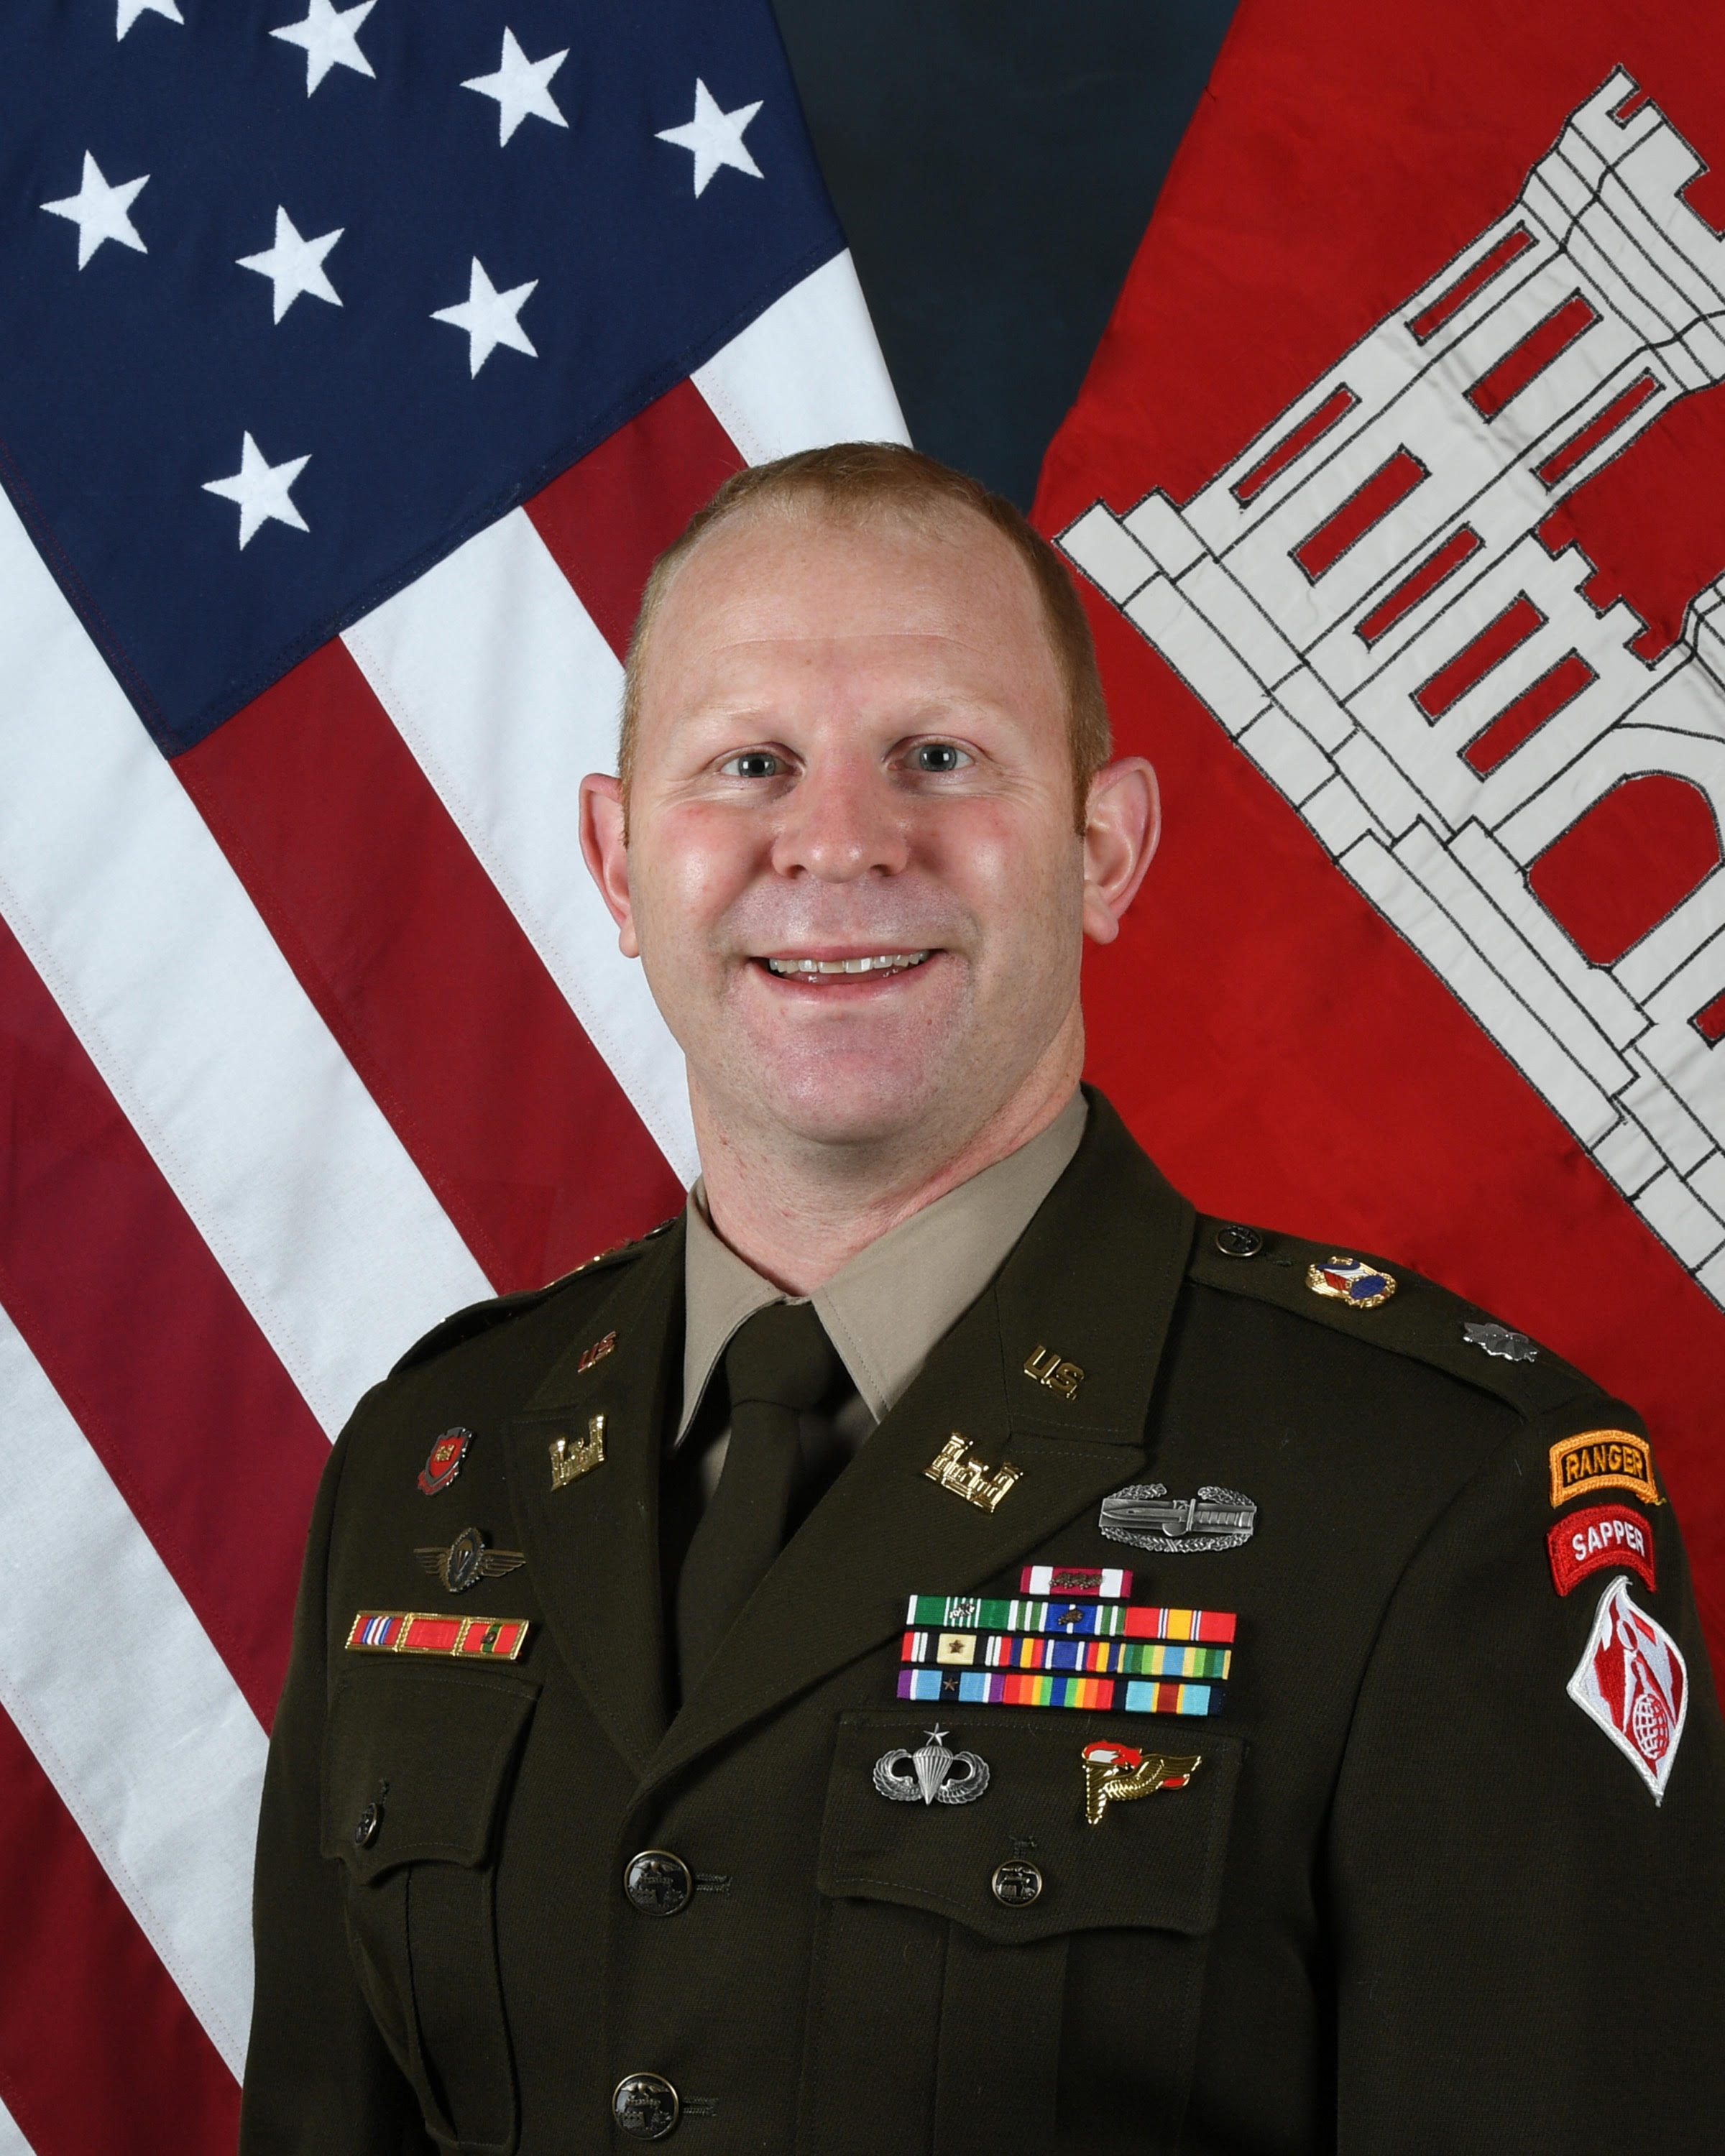 John Chambers graduated from Grosse Ile High School in 2002 as the class valedictorian, 3-sport varsity athlete, and captain of the football team. He went on to receive a bachelors degree from the United States Military Academy at West Point and Masters degrees from Missouri S&T and the Harvard Kennedy School of Government. A Lieutenant Colonel in the US Army, he currently serves as the Deputy Commander of the US Army Corps of Engineers Kansas City District and will assume command of an Army Engineer Battalion in 2024.